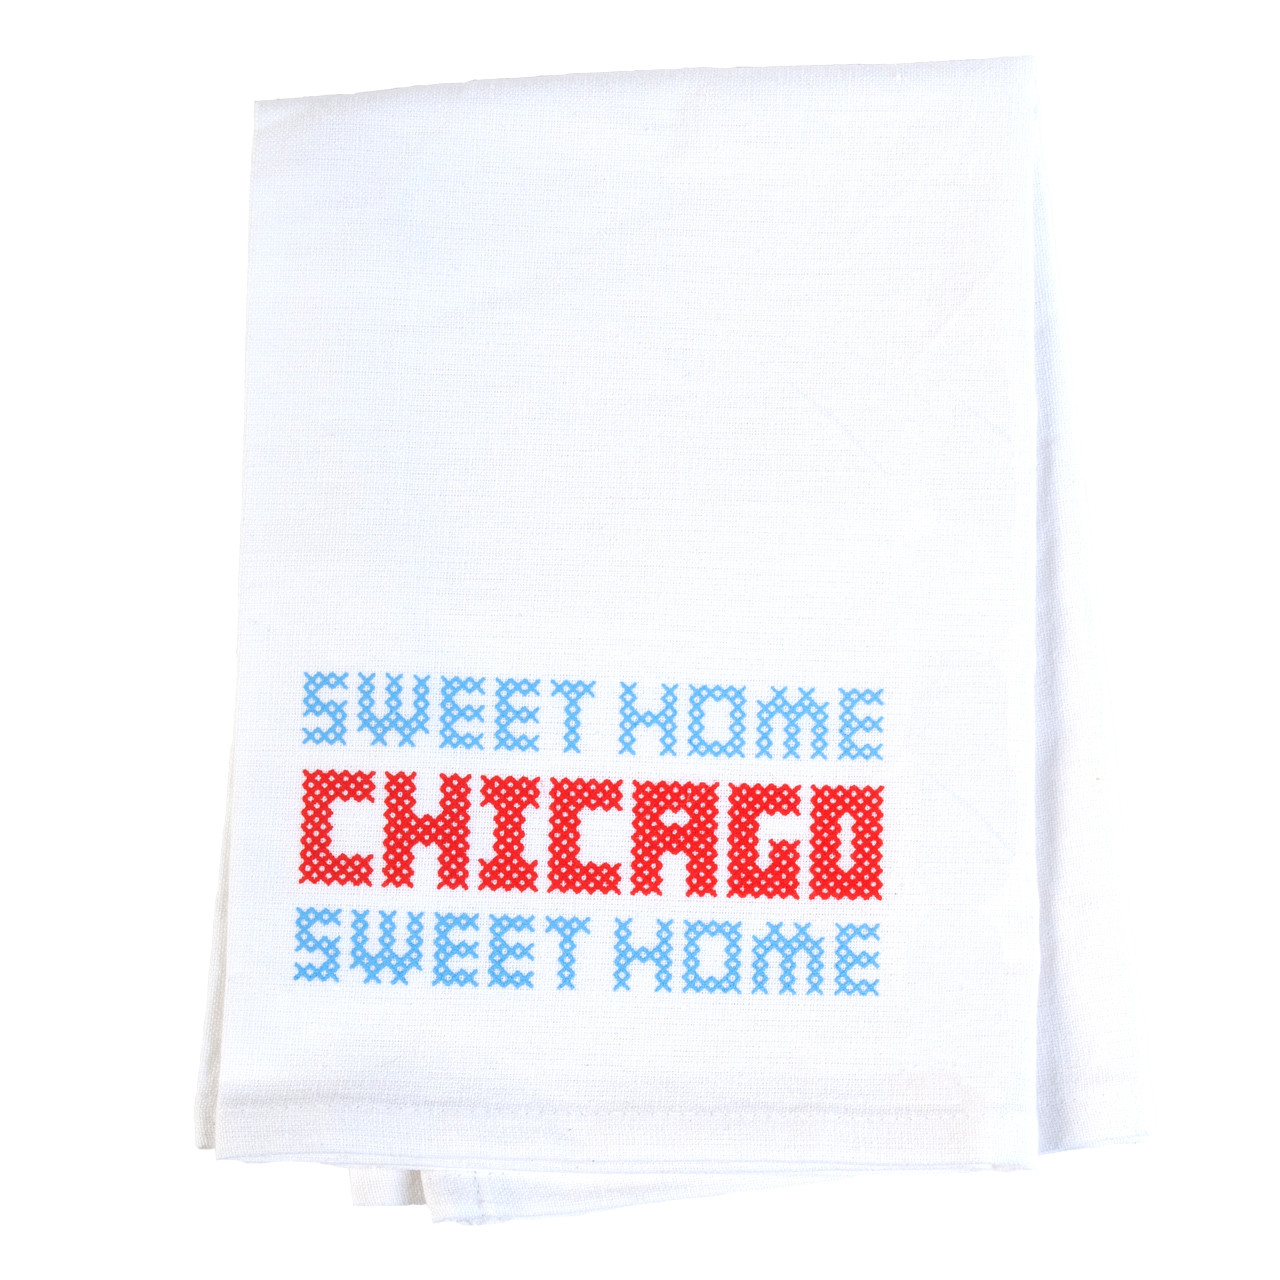 https://cdn11.bigcommerce.com/s-4np45xy/images/stencil/1280x1280/products/545/1774/Sweet_Home_Chicago_Flour_Sack_Towel__00677.1636258844.jpg?c=2